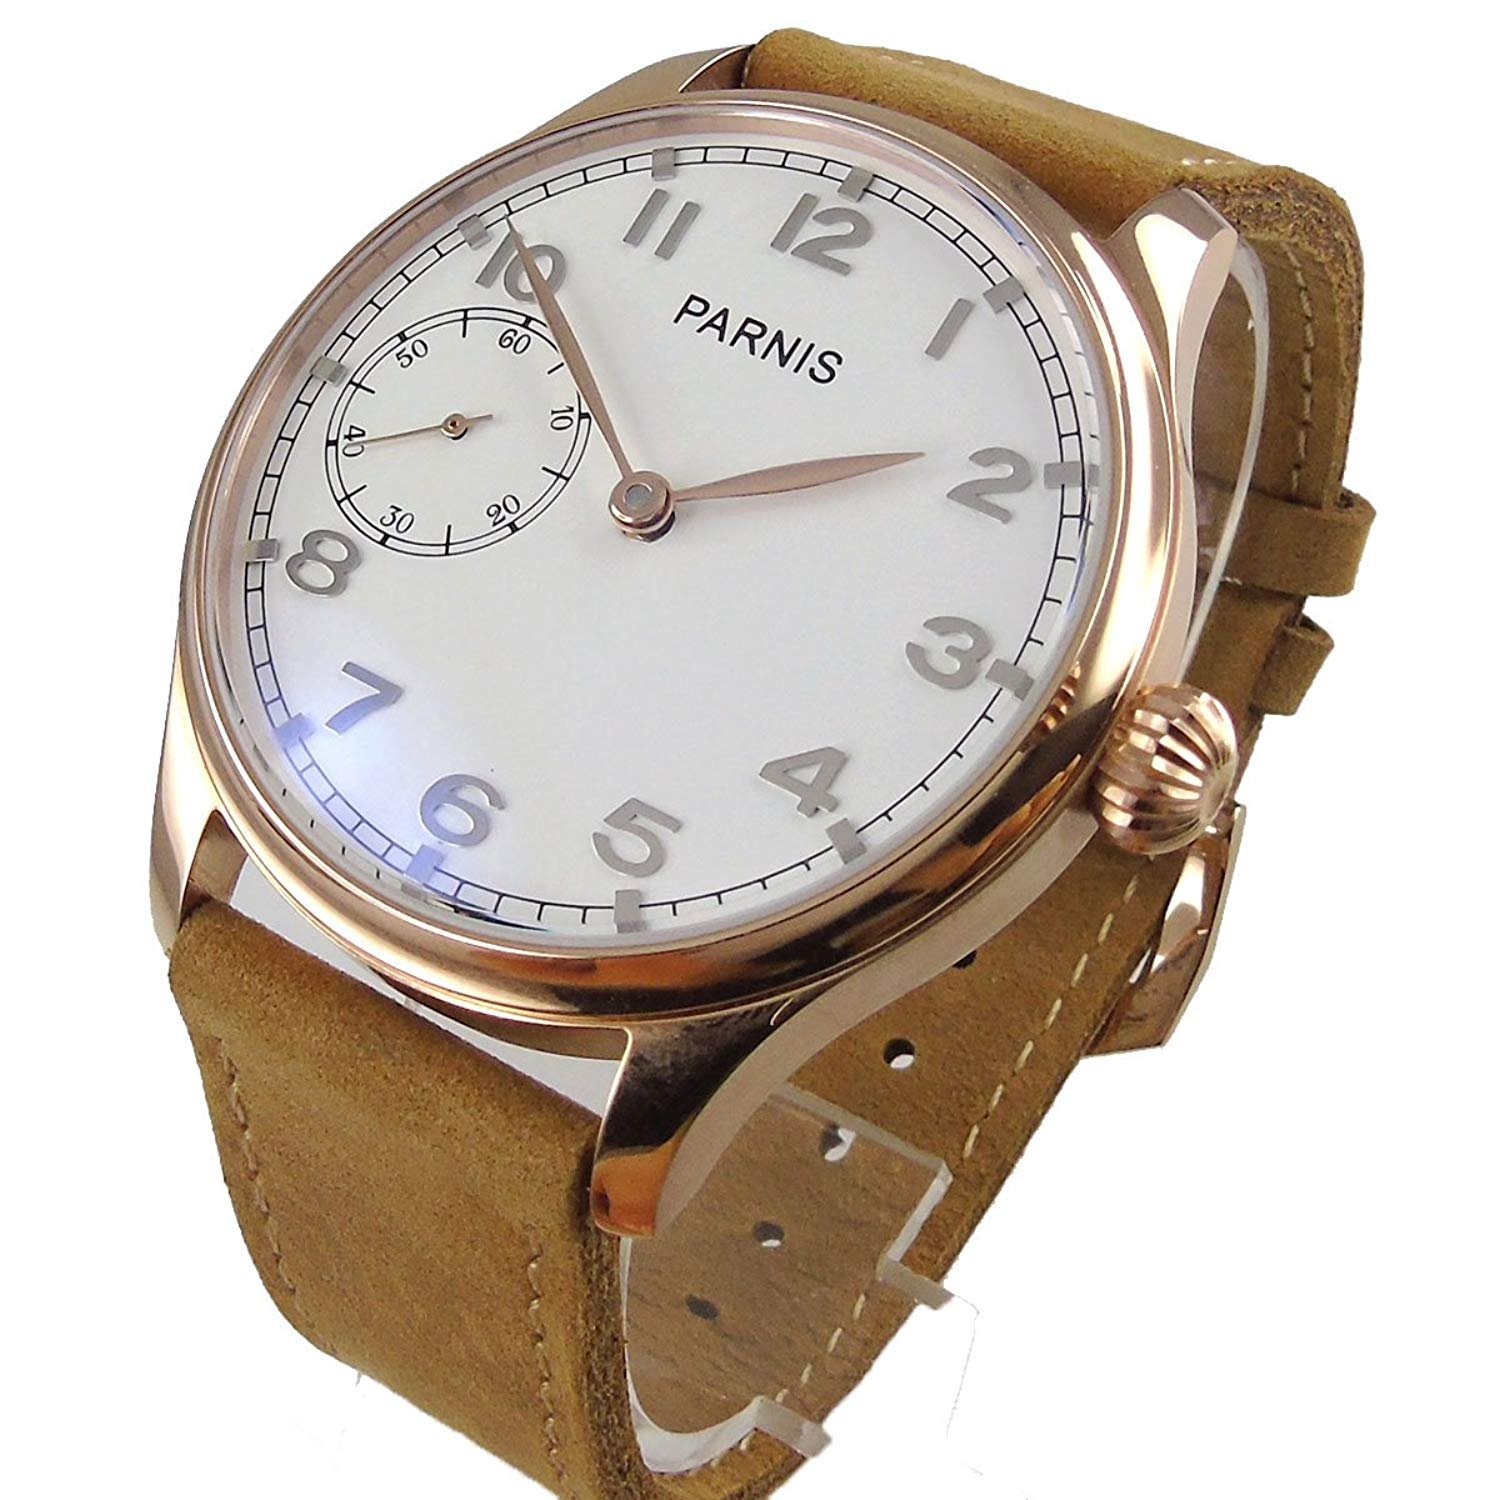 WhatsWatch Parnis 44MM White Dial Rose Gold Case 17 Jewels 6497 Hand-Winding Movement Men's Wristwatch Leather Strap -428